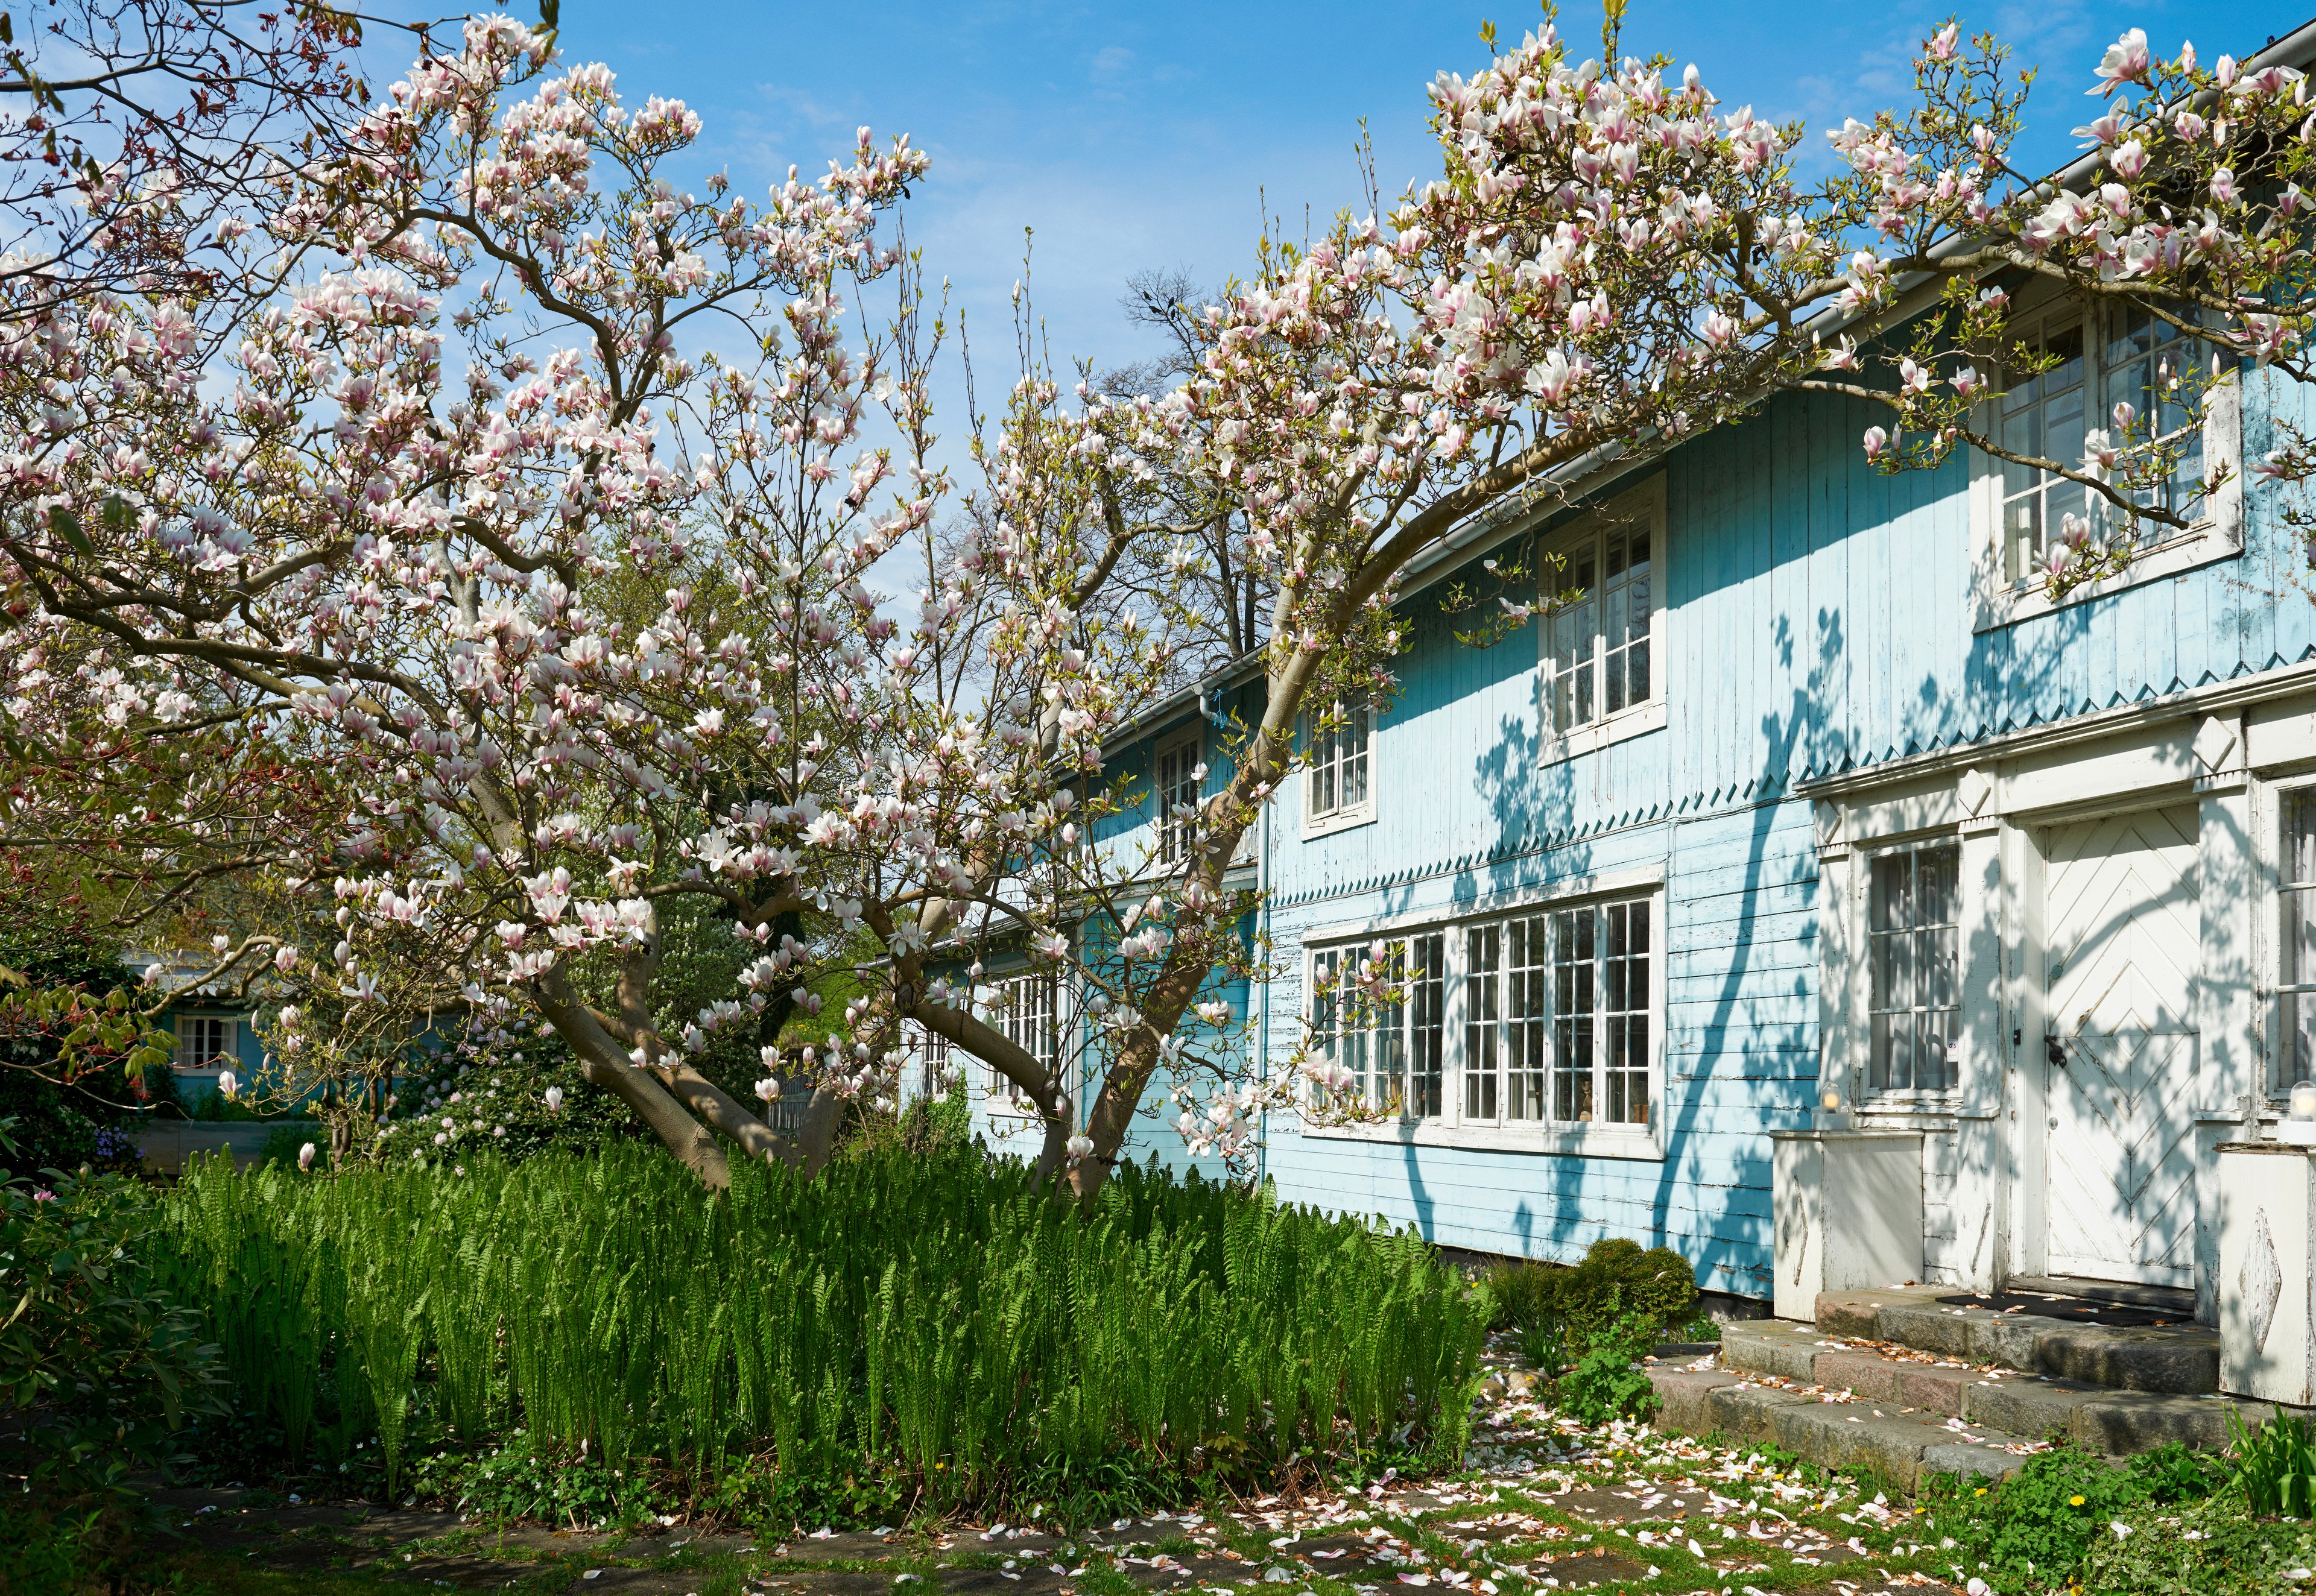 The Blue House, Bjørn Wiinblad's private home and studio